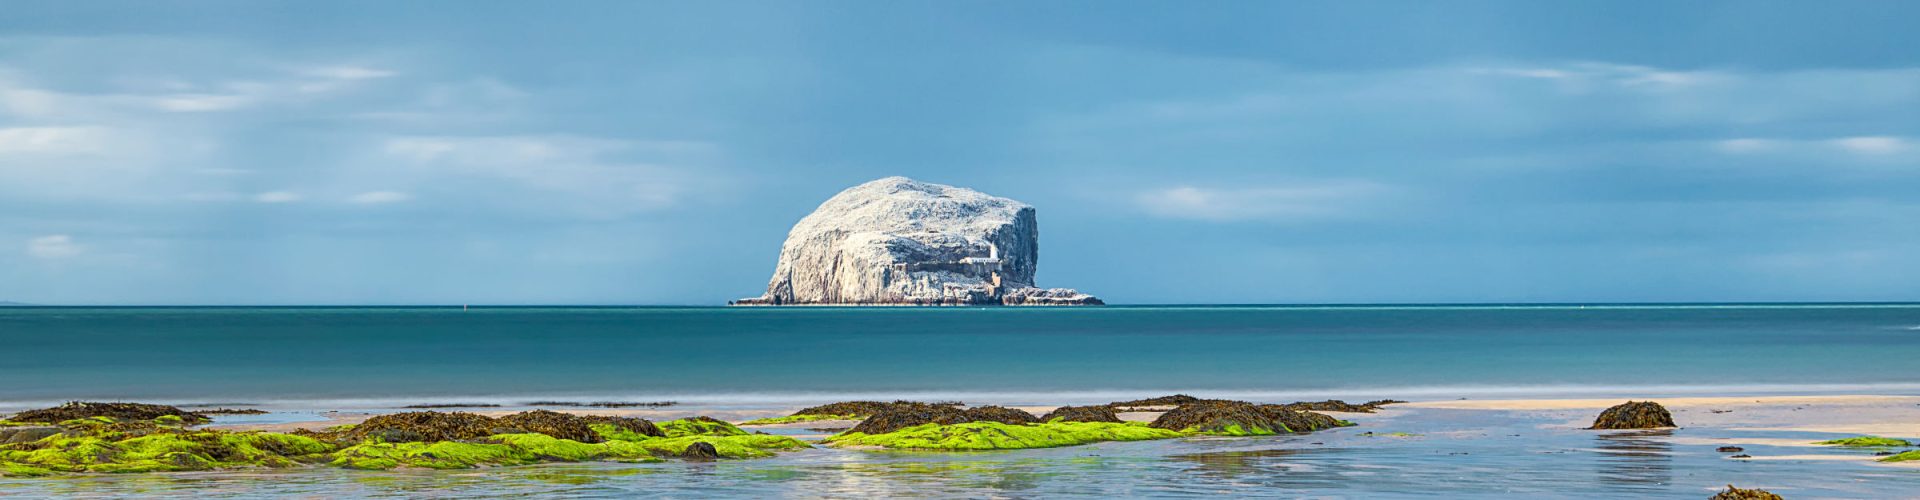 View of the Bass Rock from North Berwick in East Lothian